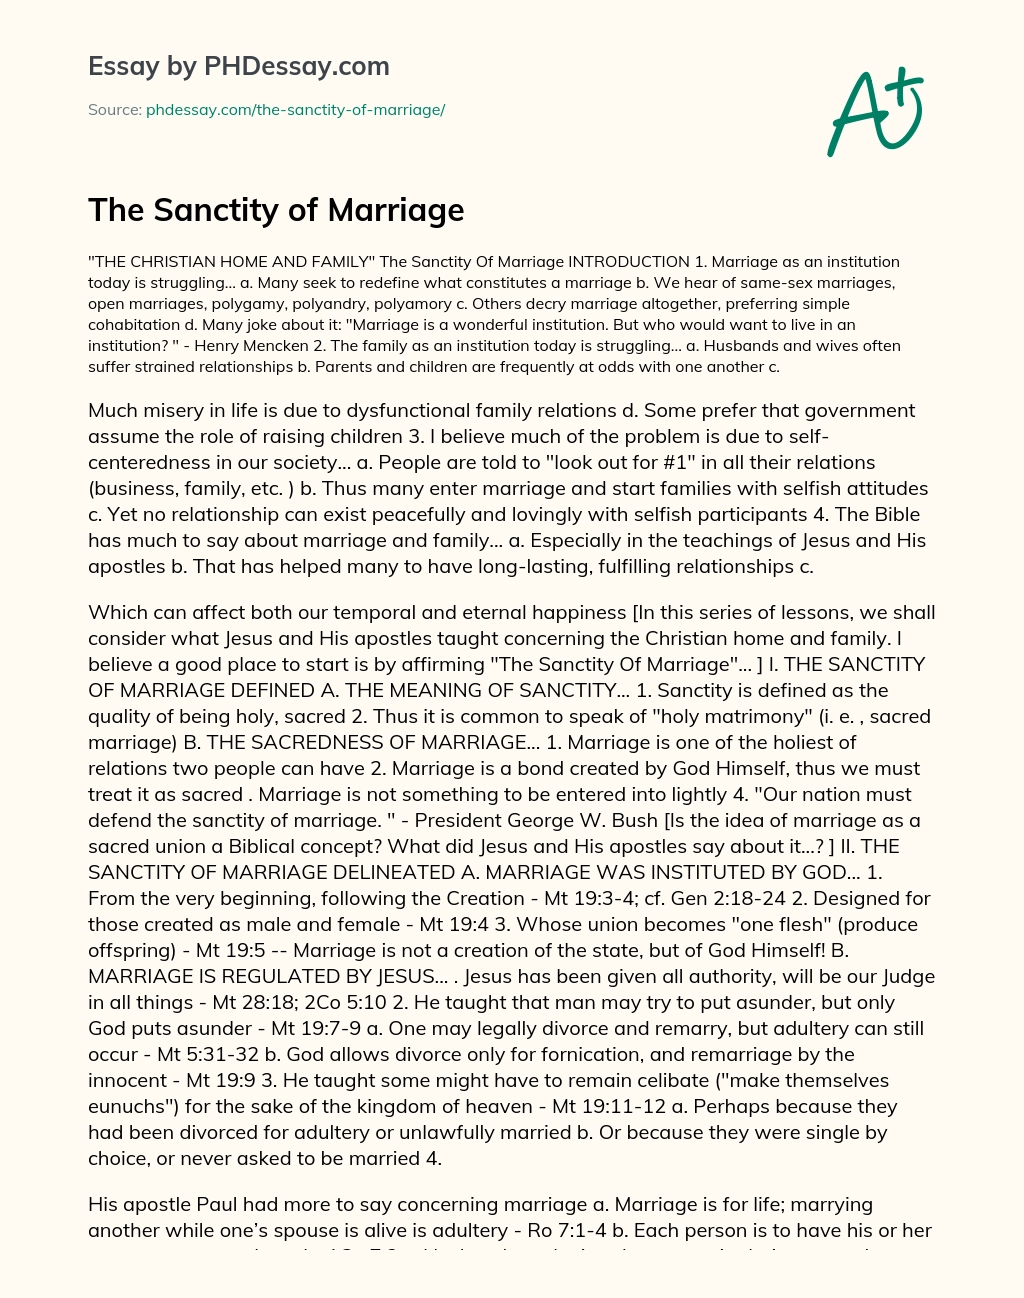 The Sanctity of Marriage essay